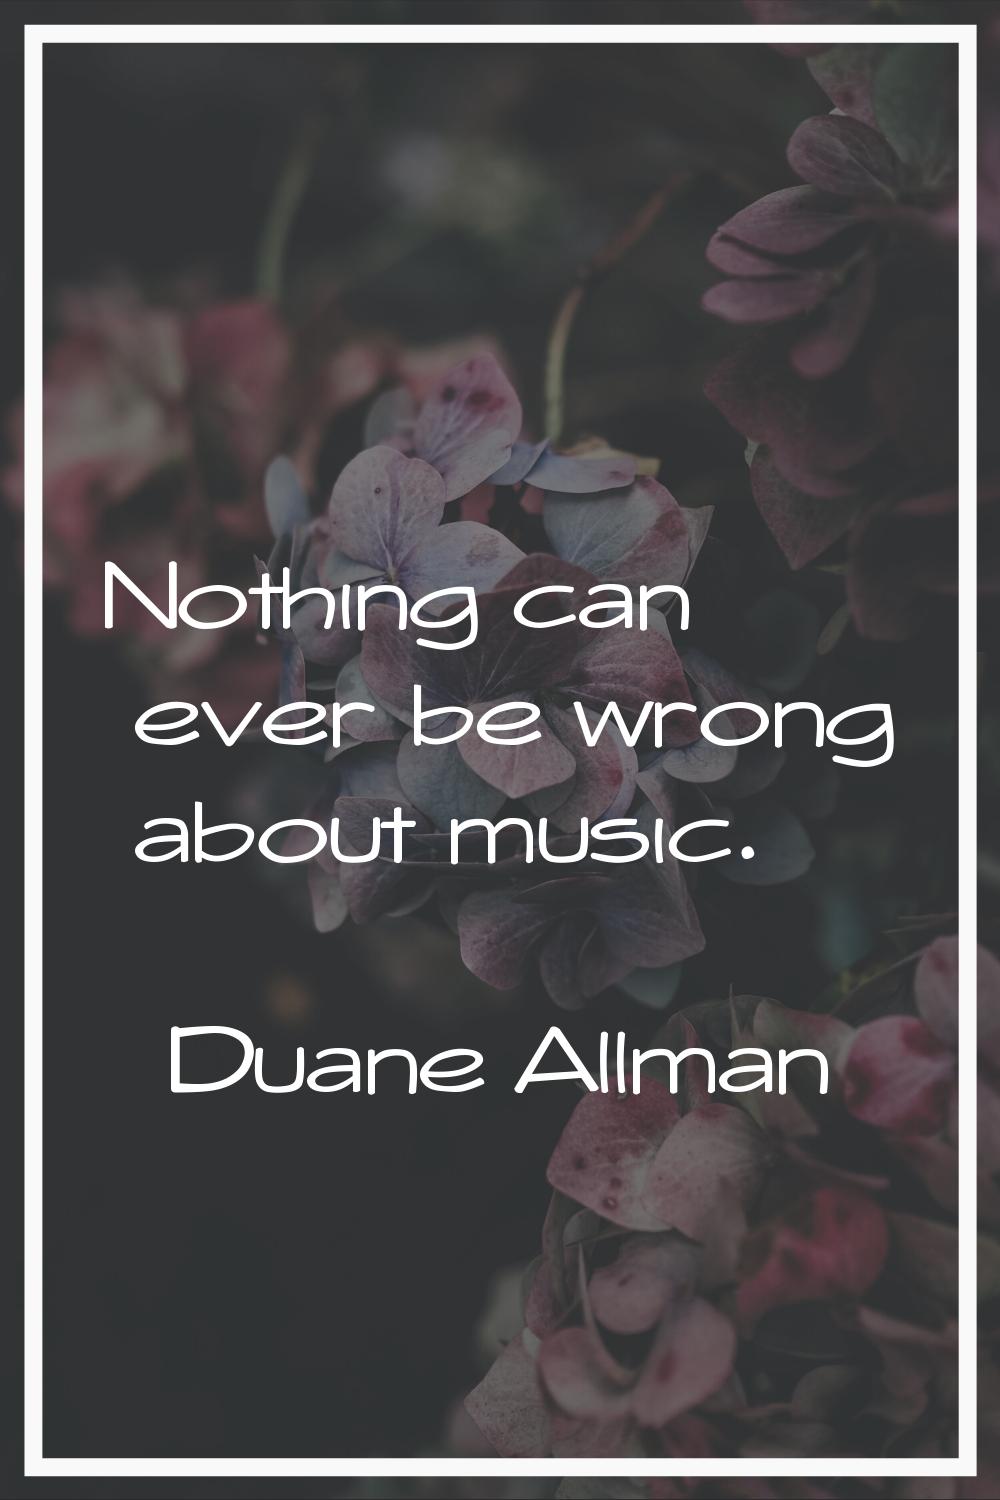 Nothing can ever be wrong about music.